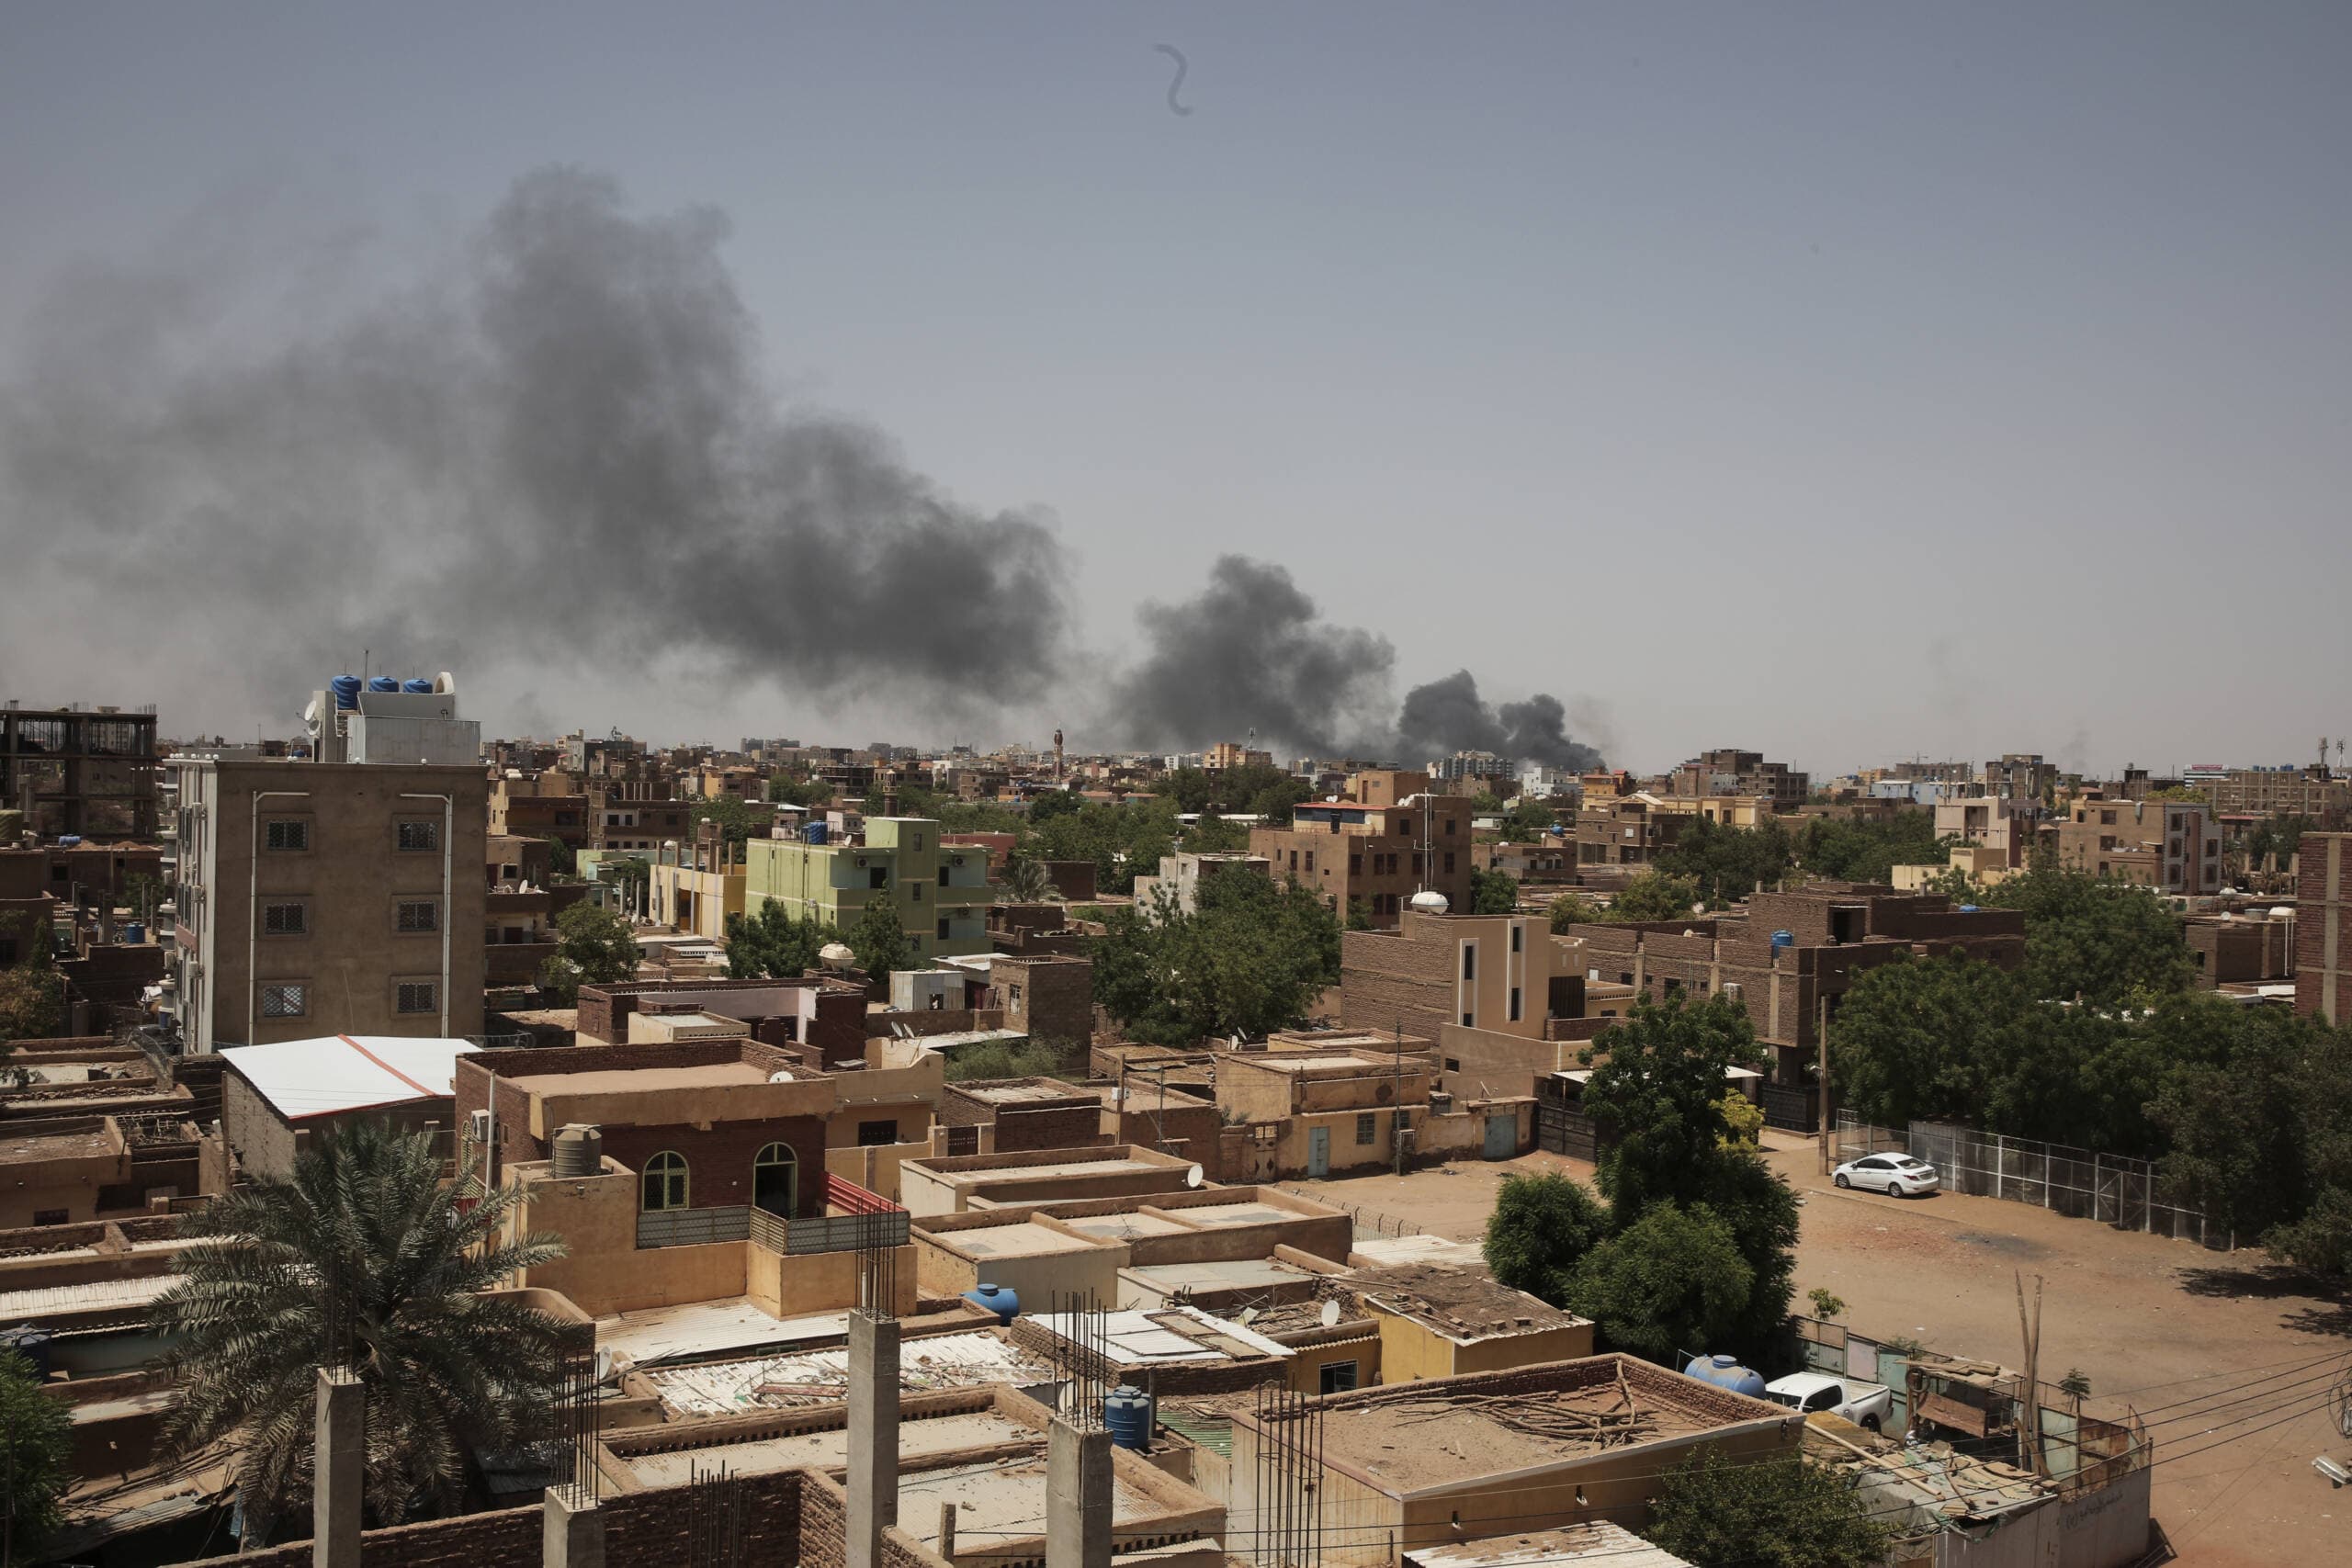 Smoke is seen in Khartoum, Sudan, Saturday, April 22, 2023. The fighting in the capital between the Sudanese Army and Rapid Support Forces resumed after an internationally brokered cease-fire failed. (Marwan Ali/AP)